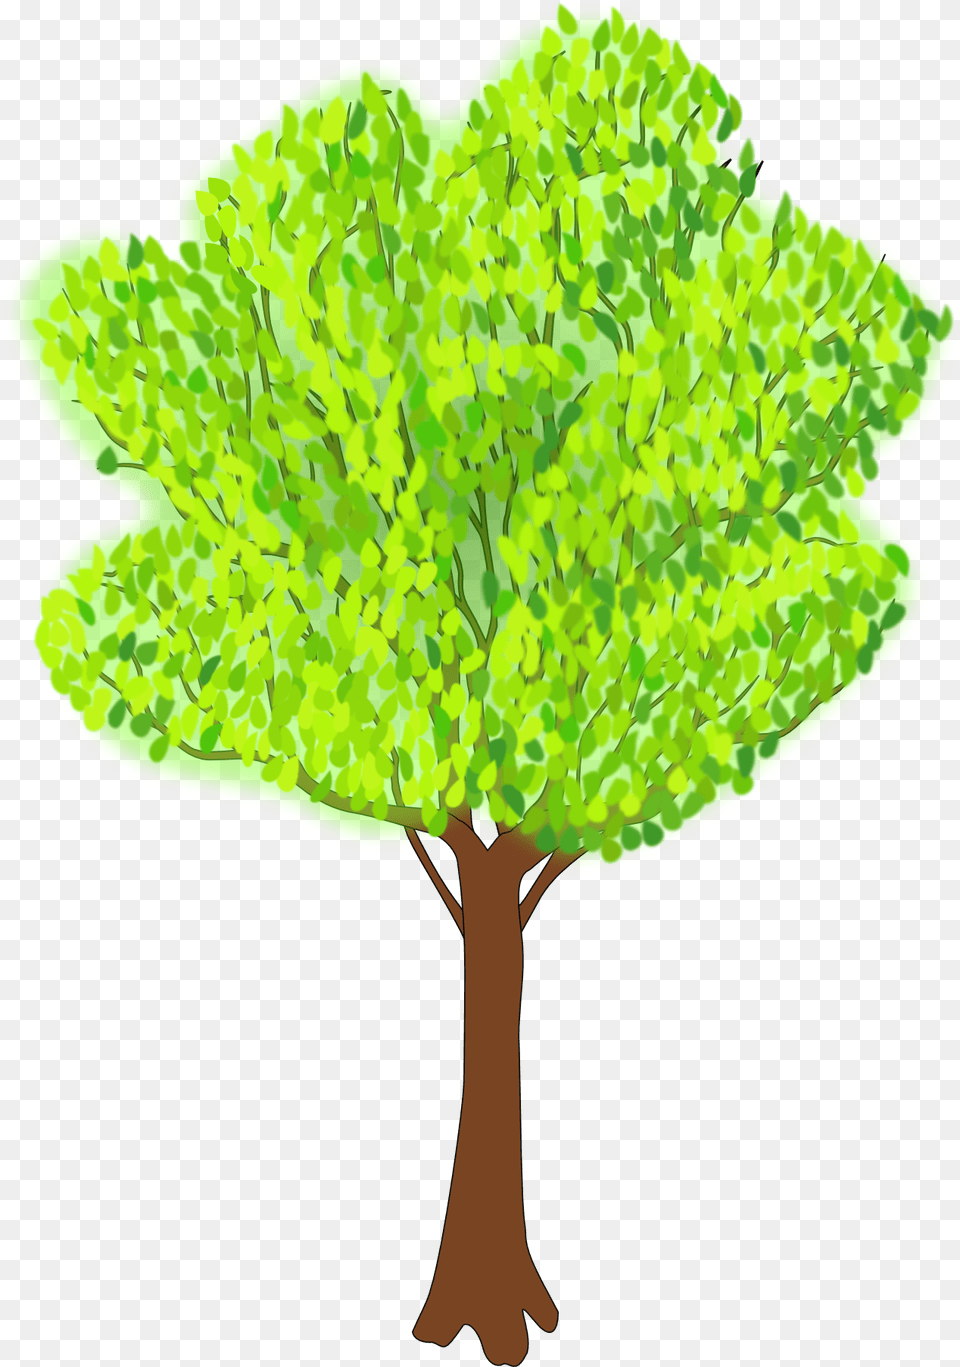 Tree With The Green Foliage In Summer Clipart Image Clipart Tree In Summer, Leaf, Plant, Vegetation, Oak Png